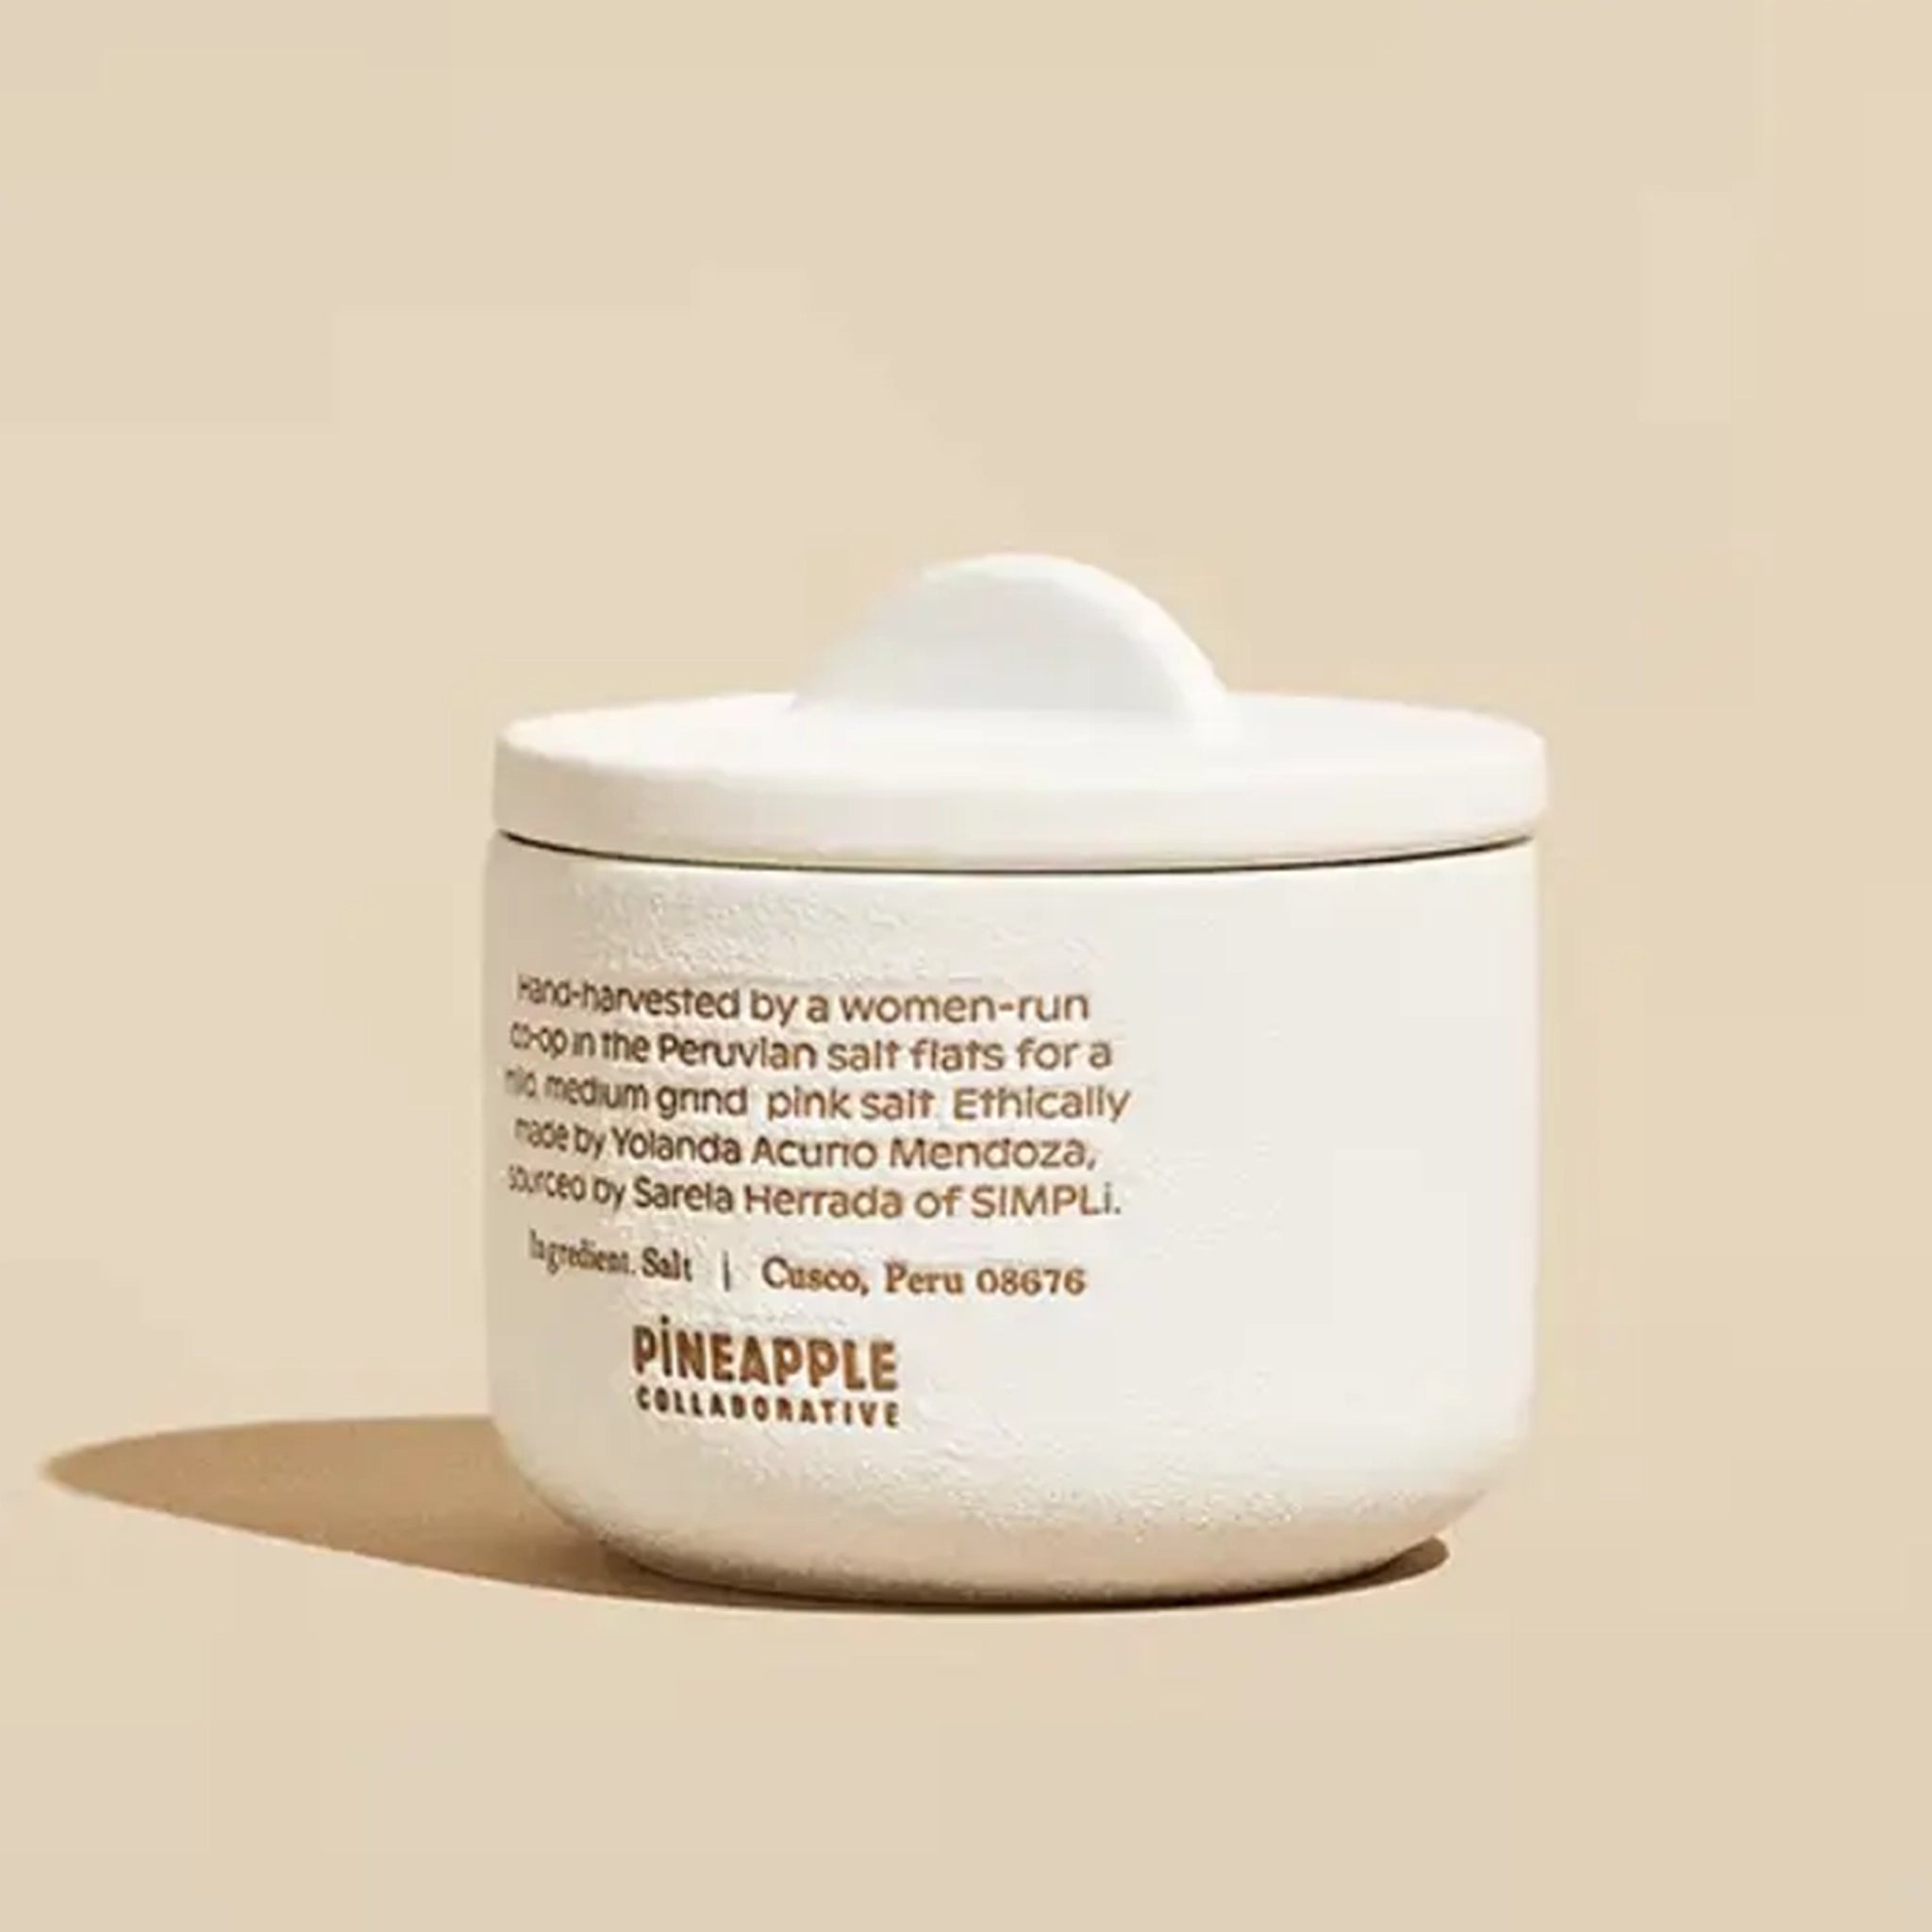 The back of the white ceramic pinch pot that reads, &quot;Hand-harvested by a women-run co-op int he Peruvian salt flats for a mild medium grind pink salt. Ethically made by Yolanda Curio Mendoza, sourced by Sara Herrada of SIMPLi.&quot;.